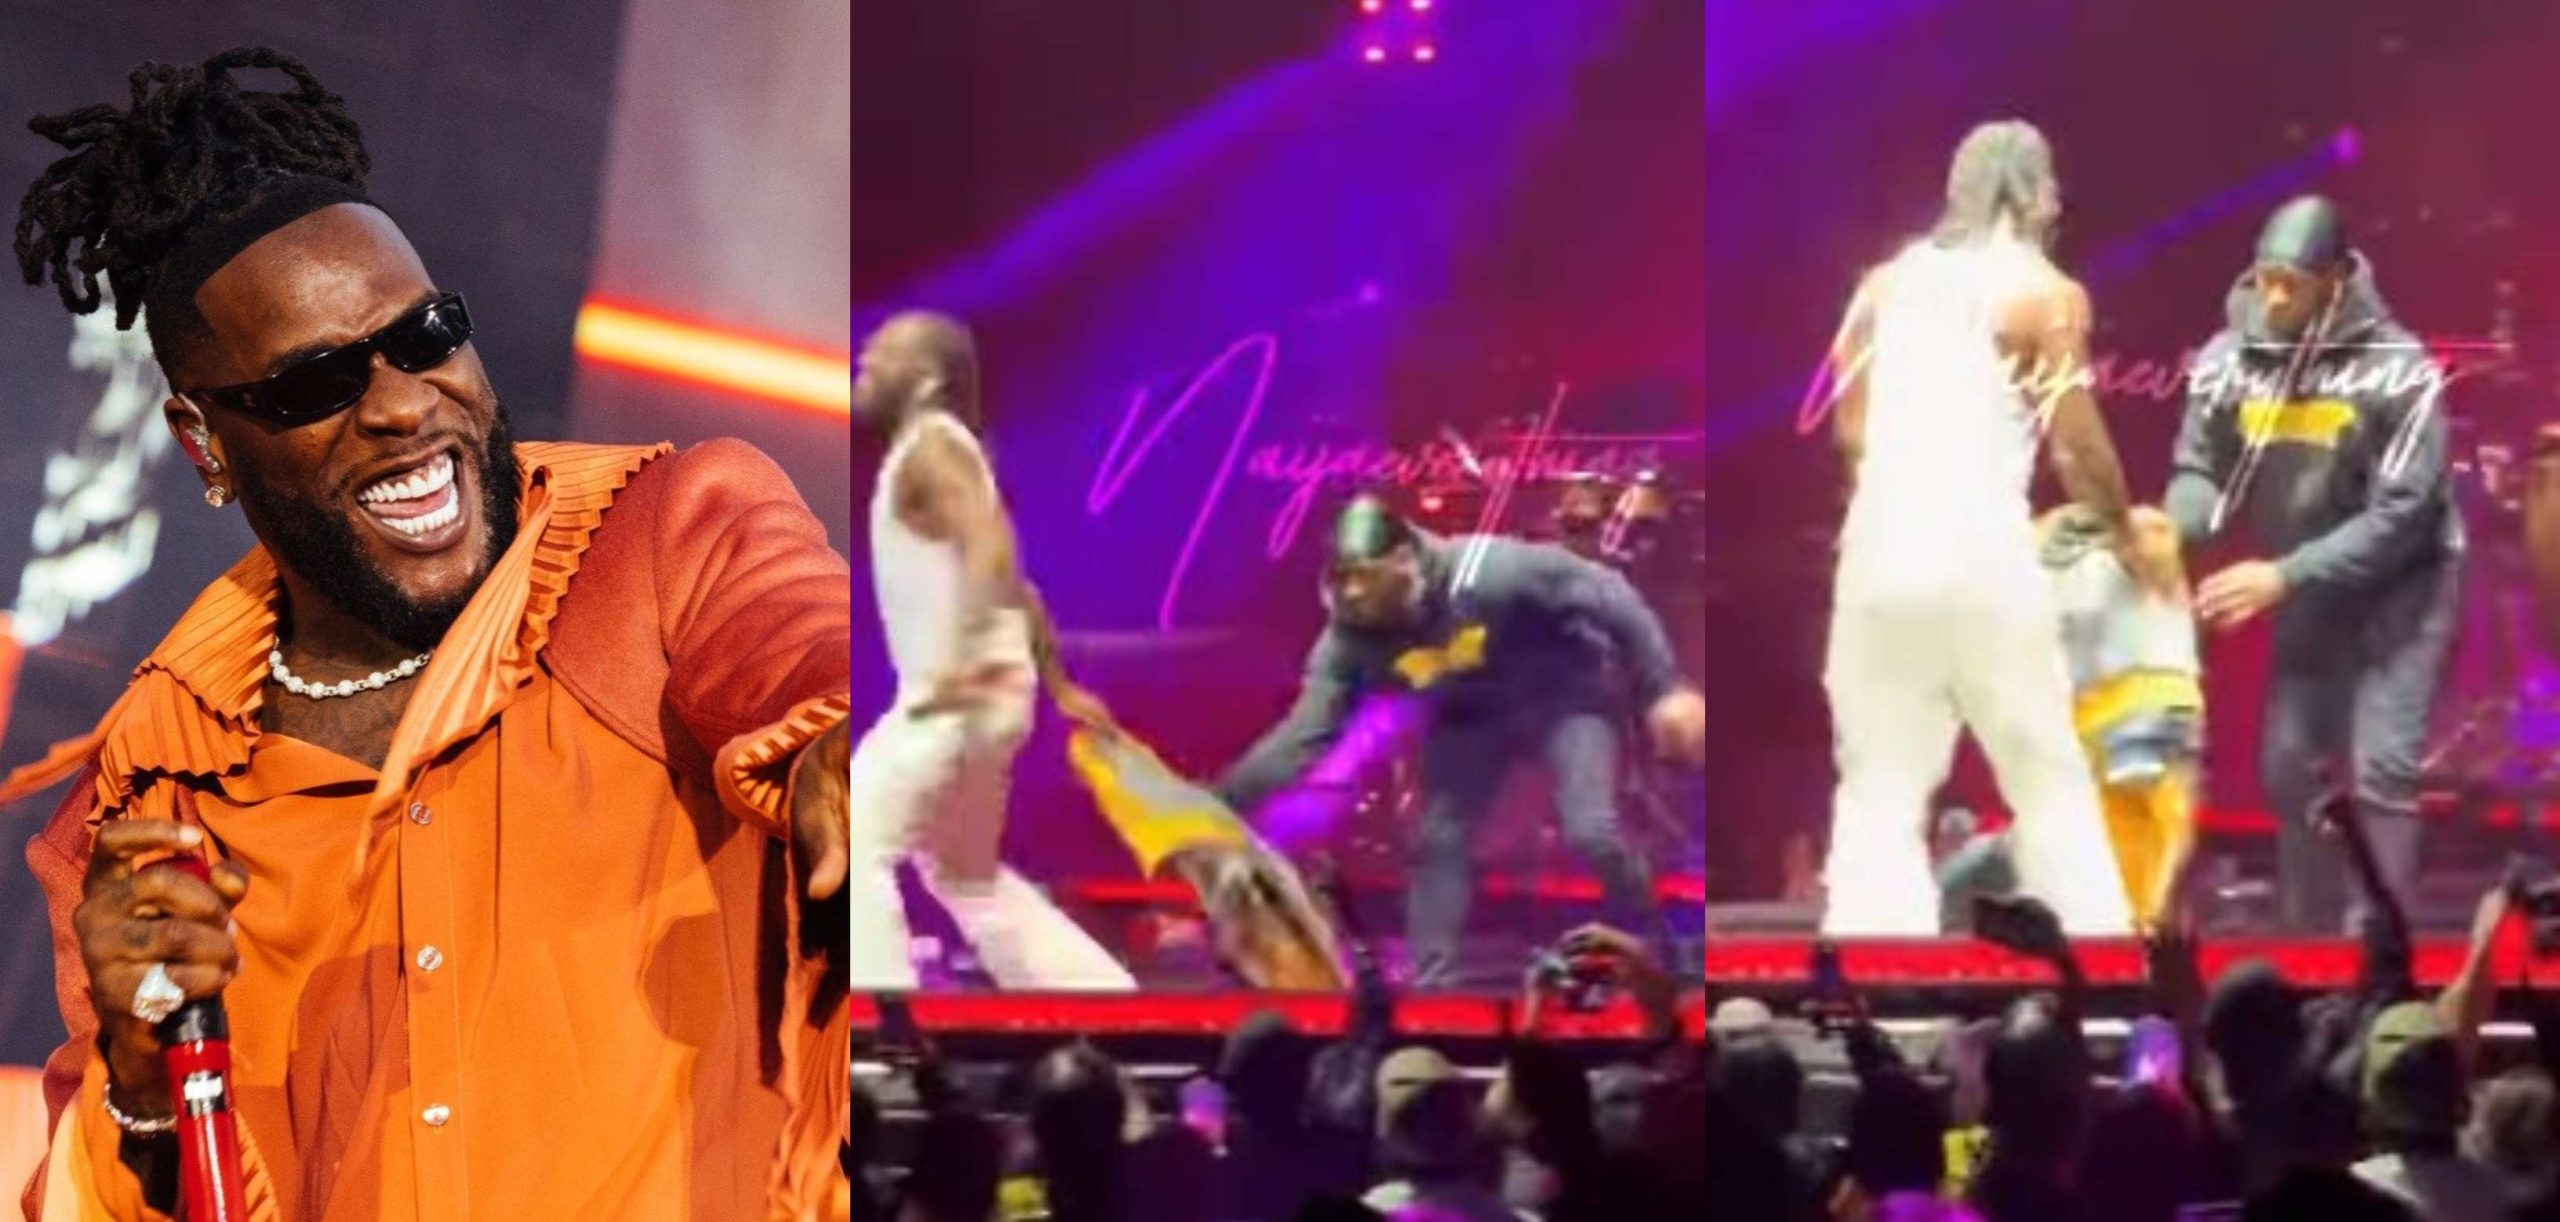 Moment Burna Boy's aide drags jacket worth $21k with him as he tries to throw it to the crowd